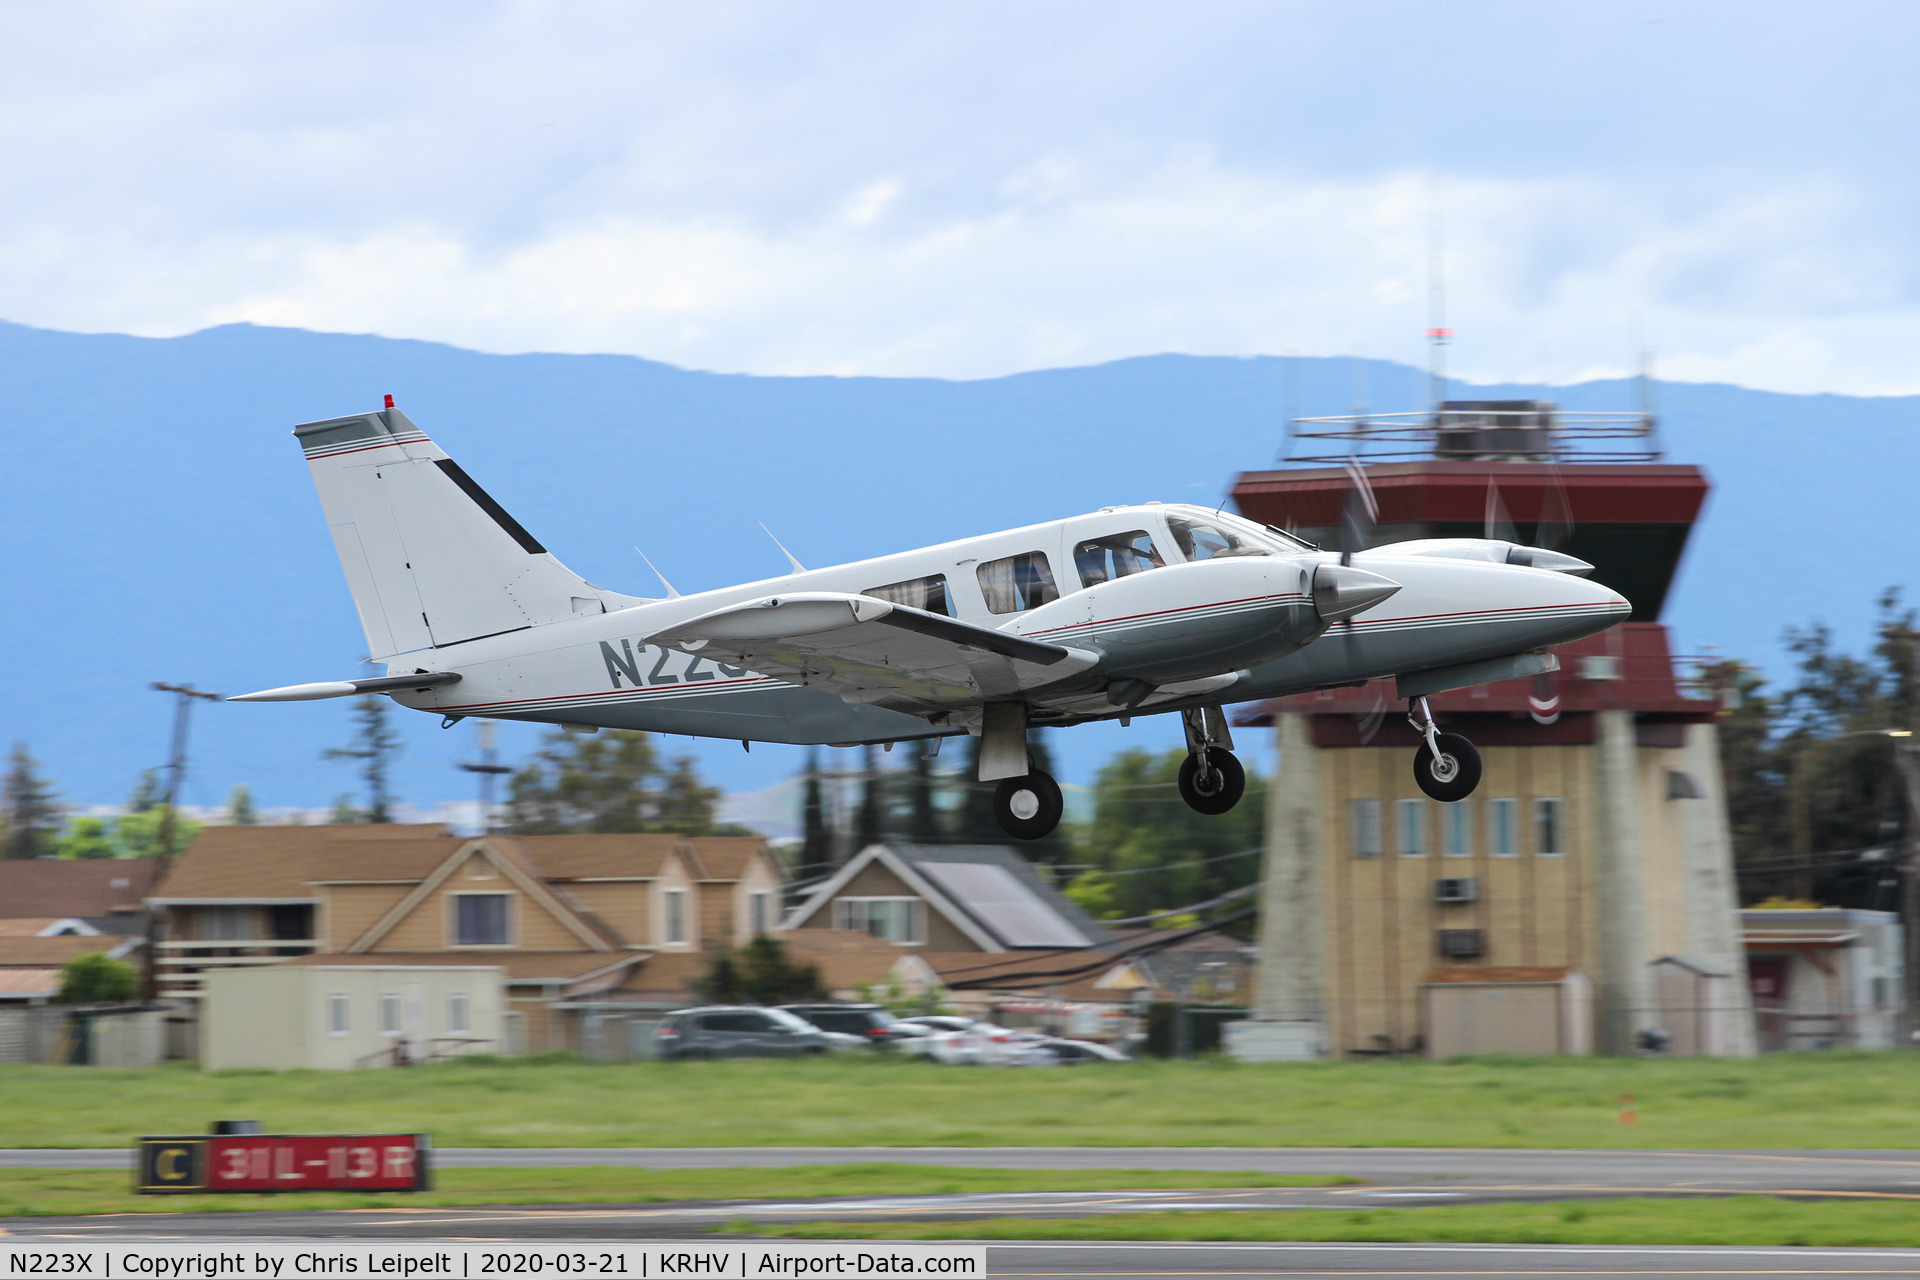 N223X, Piper PA-34-200T C/N 34-7970288, Locally based Piper PA-34-200T departing at Reid Hillview Airport, San Jose, CA.